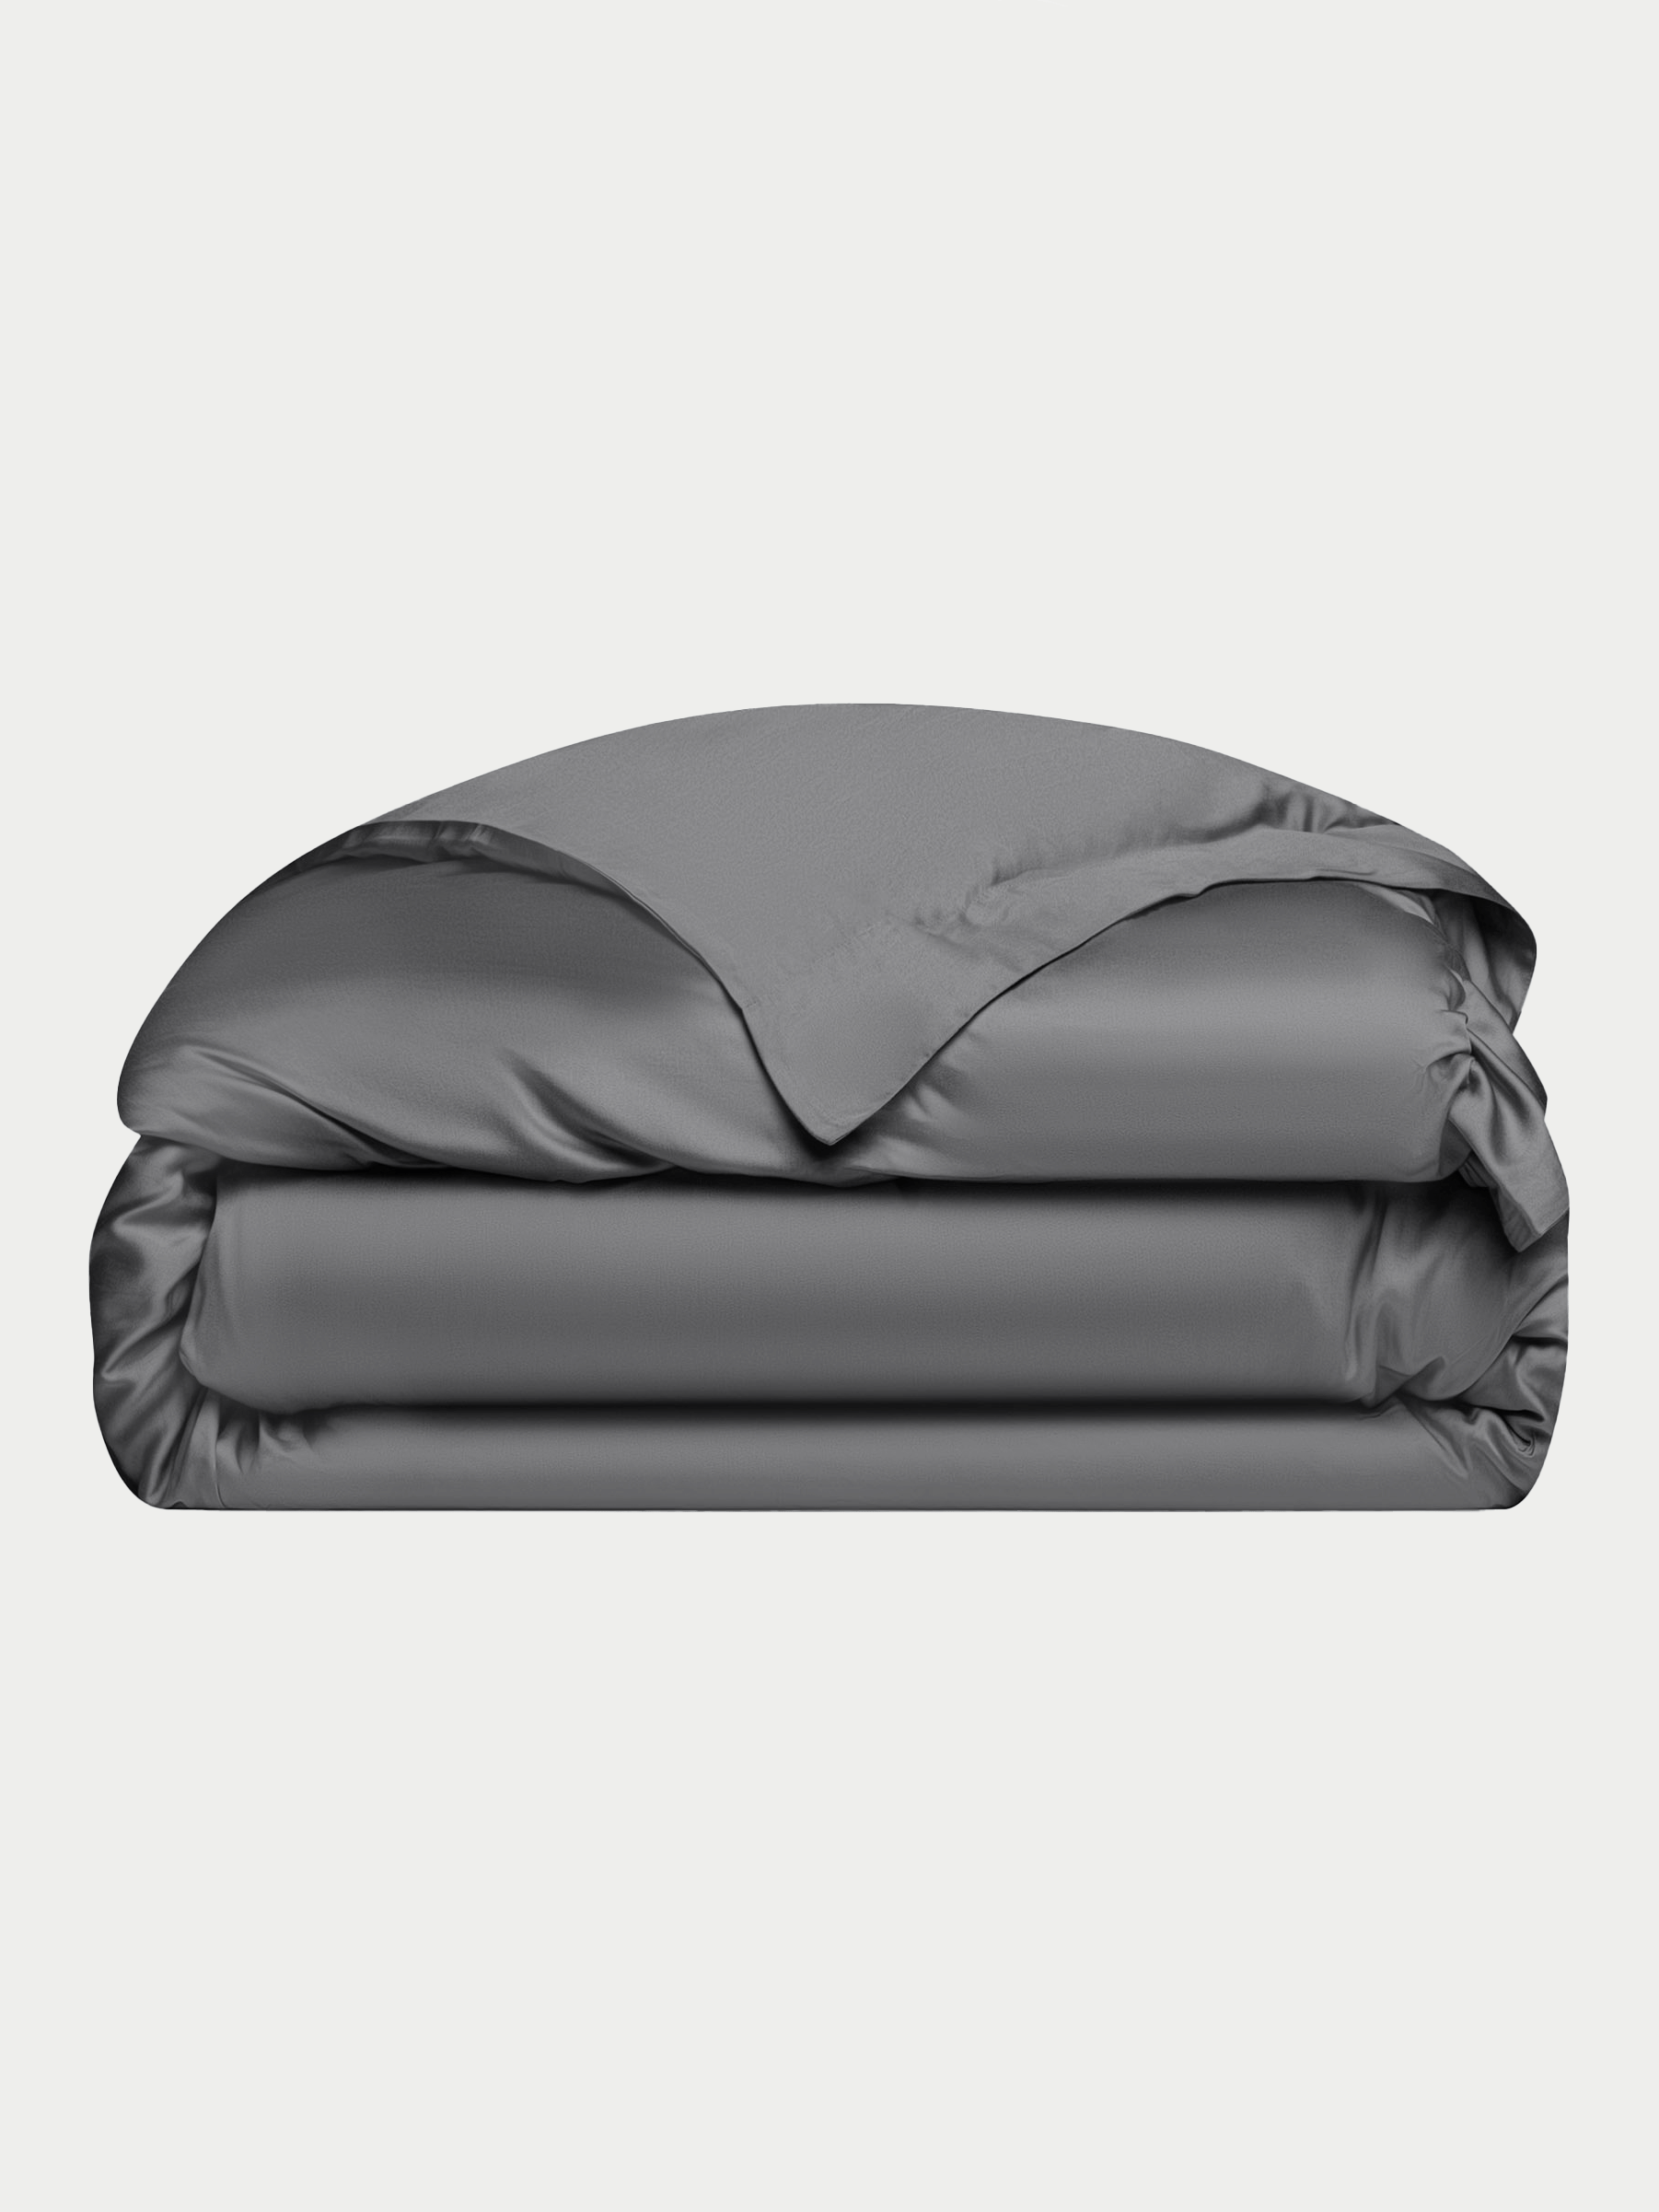 Charcoal duvet cover folded with white background |Color:Charcoal